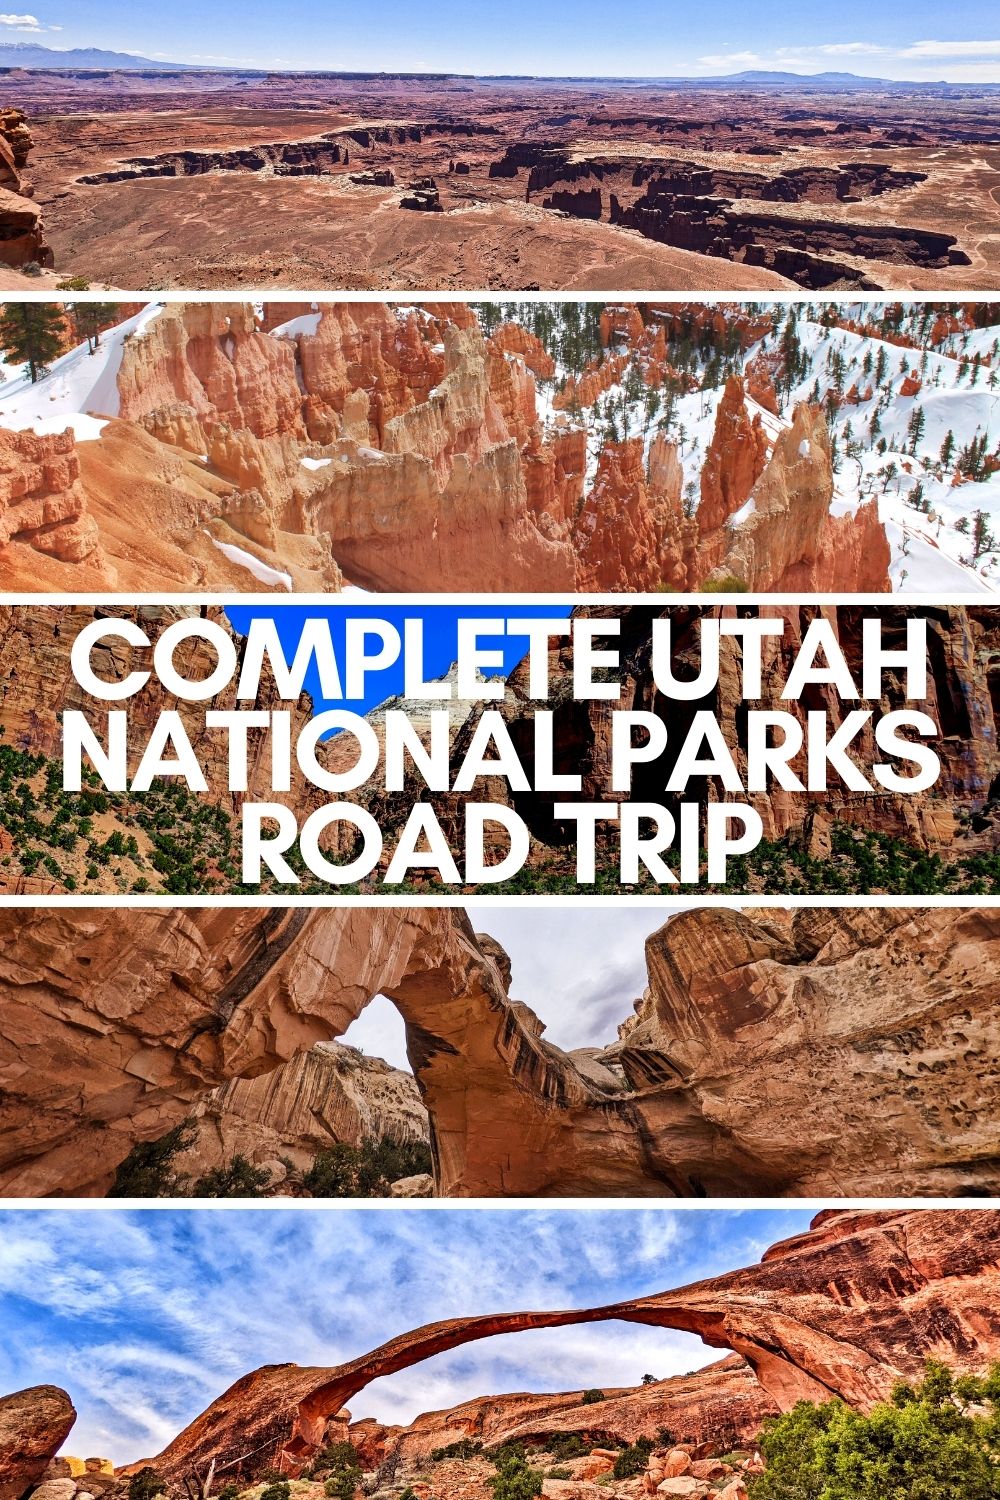 This Utah National Parks road trip plan takes you to all five parks, includes some stops at amazing Utah State Parks and goes off the beaten path for an amazing trip. Includes hotel recommendation and how to plan this fun Utah road trip.